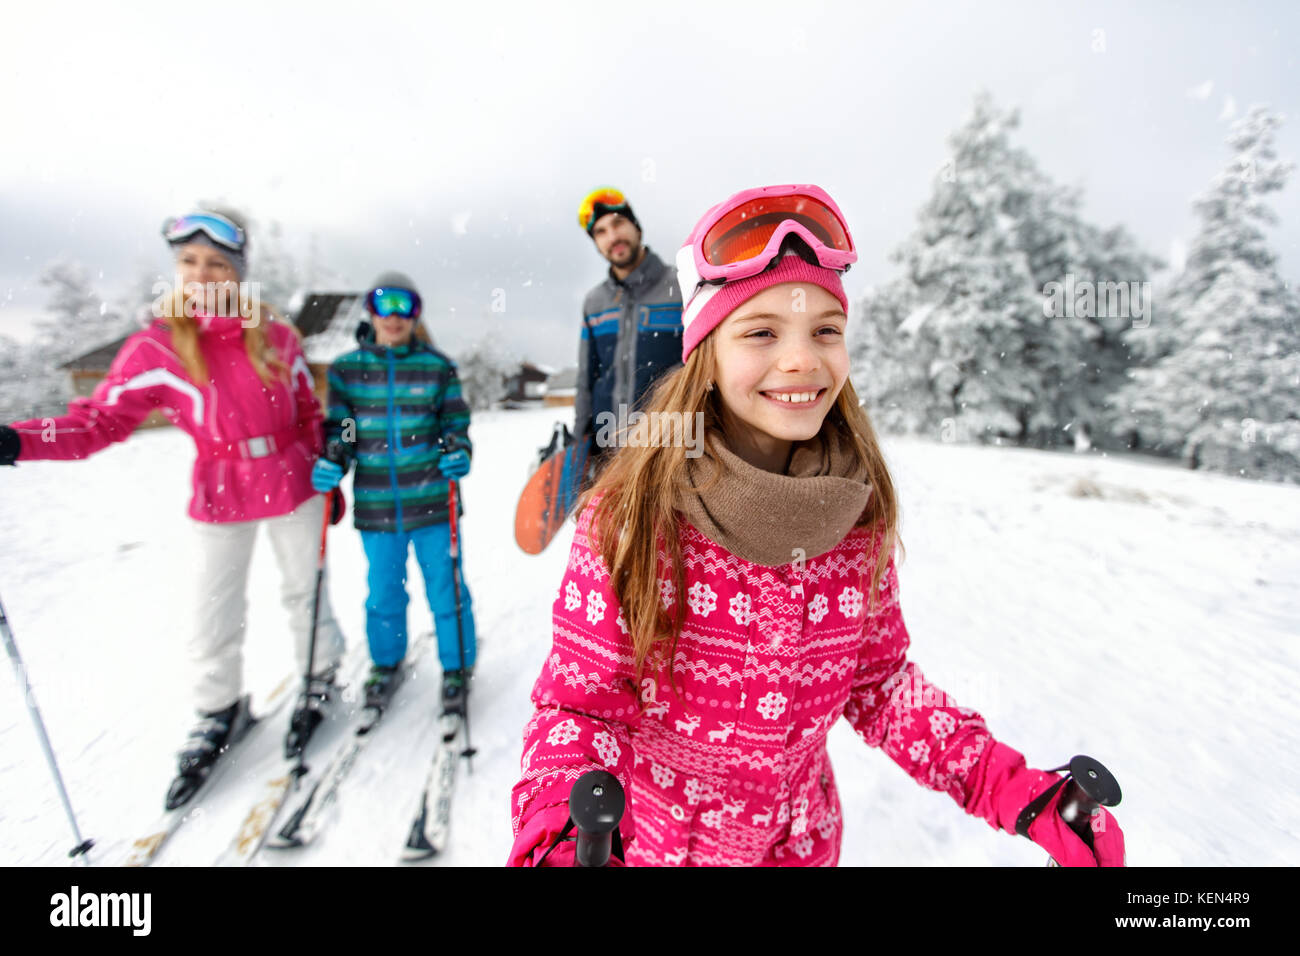 Cute girl skier skiing with family on mountain Stock Photo - Alamy